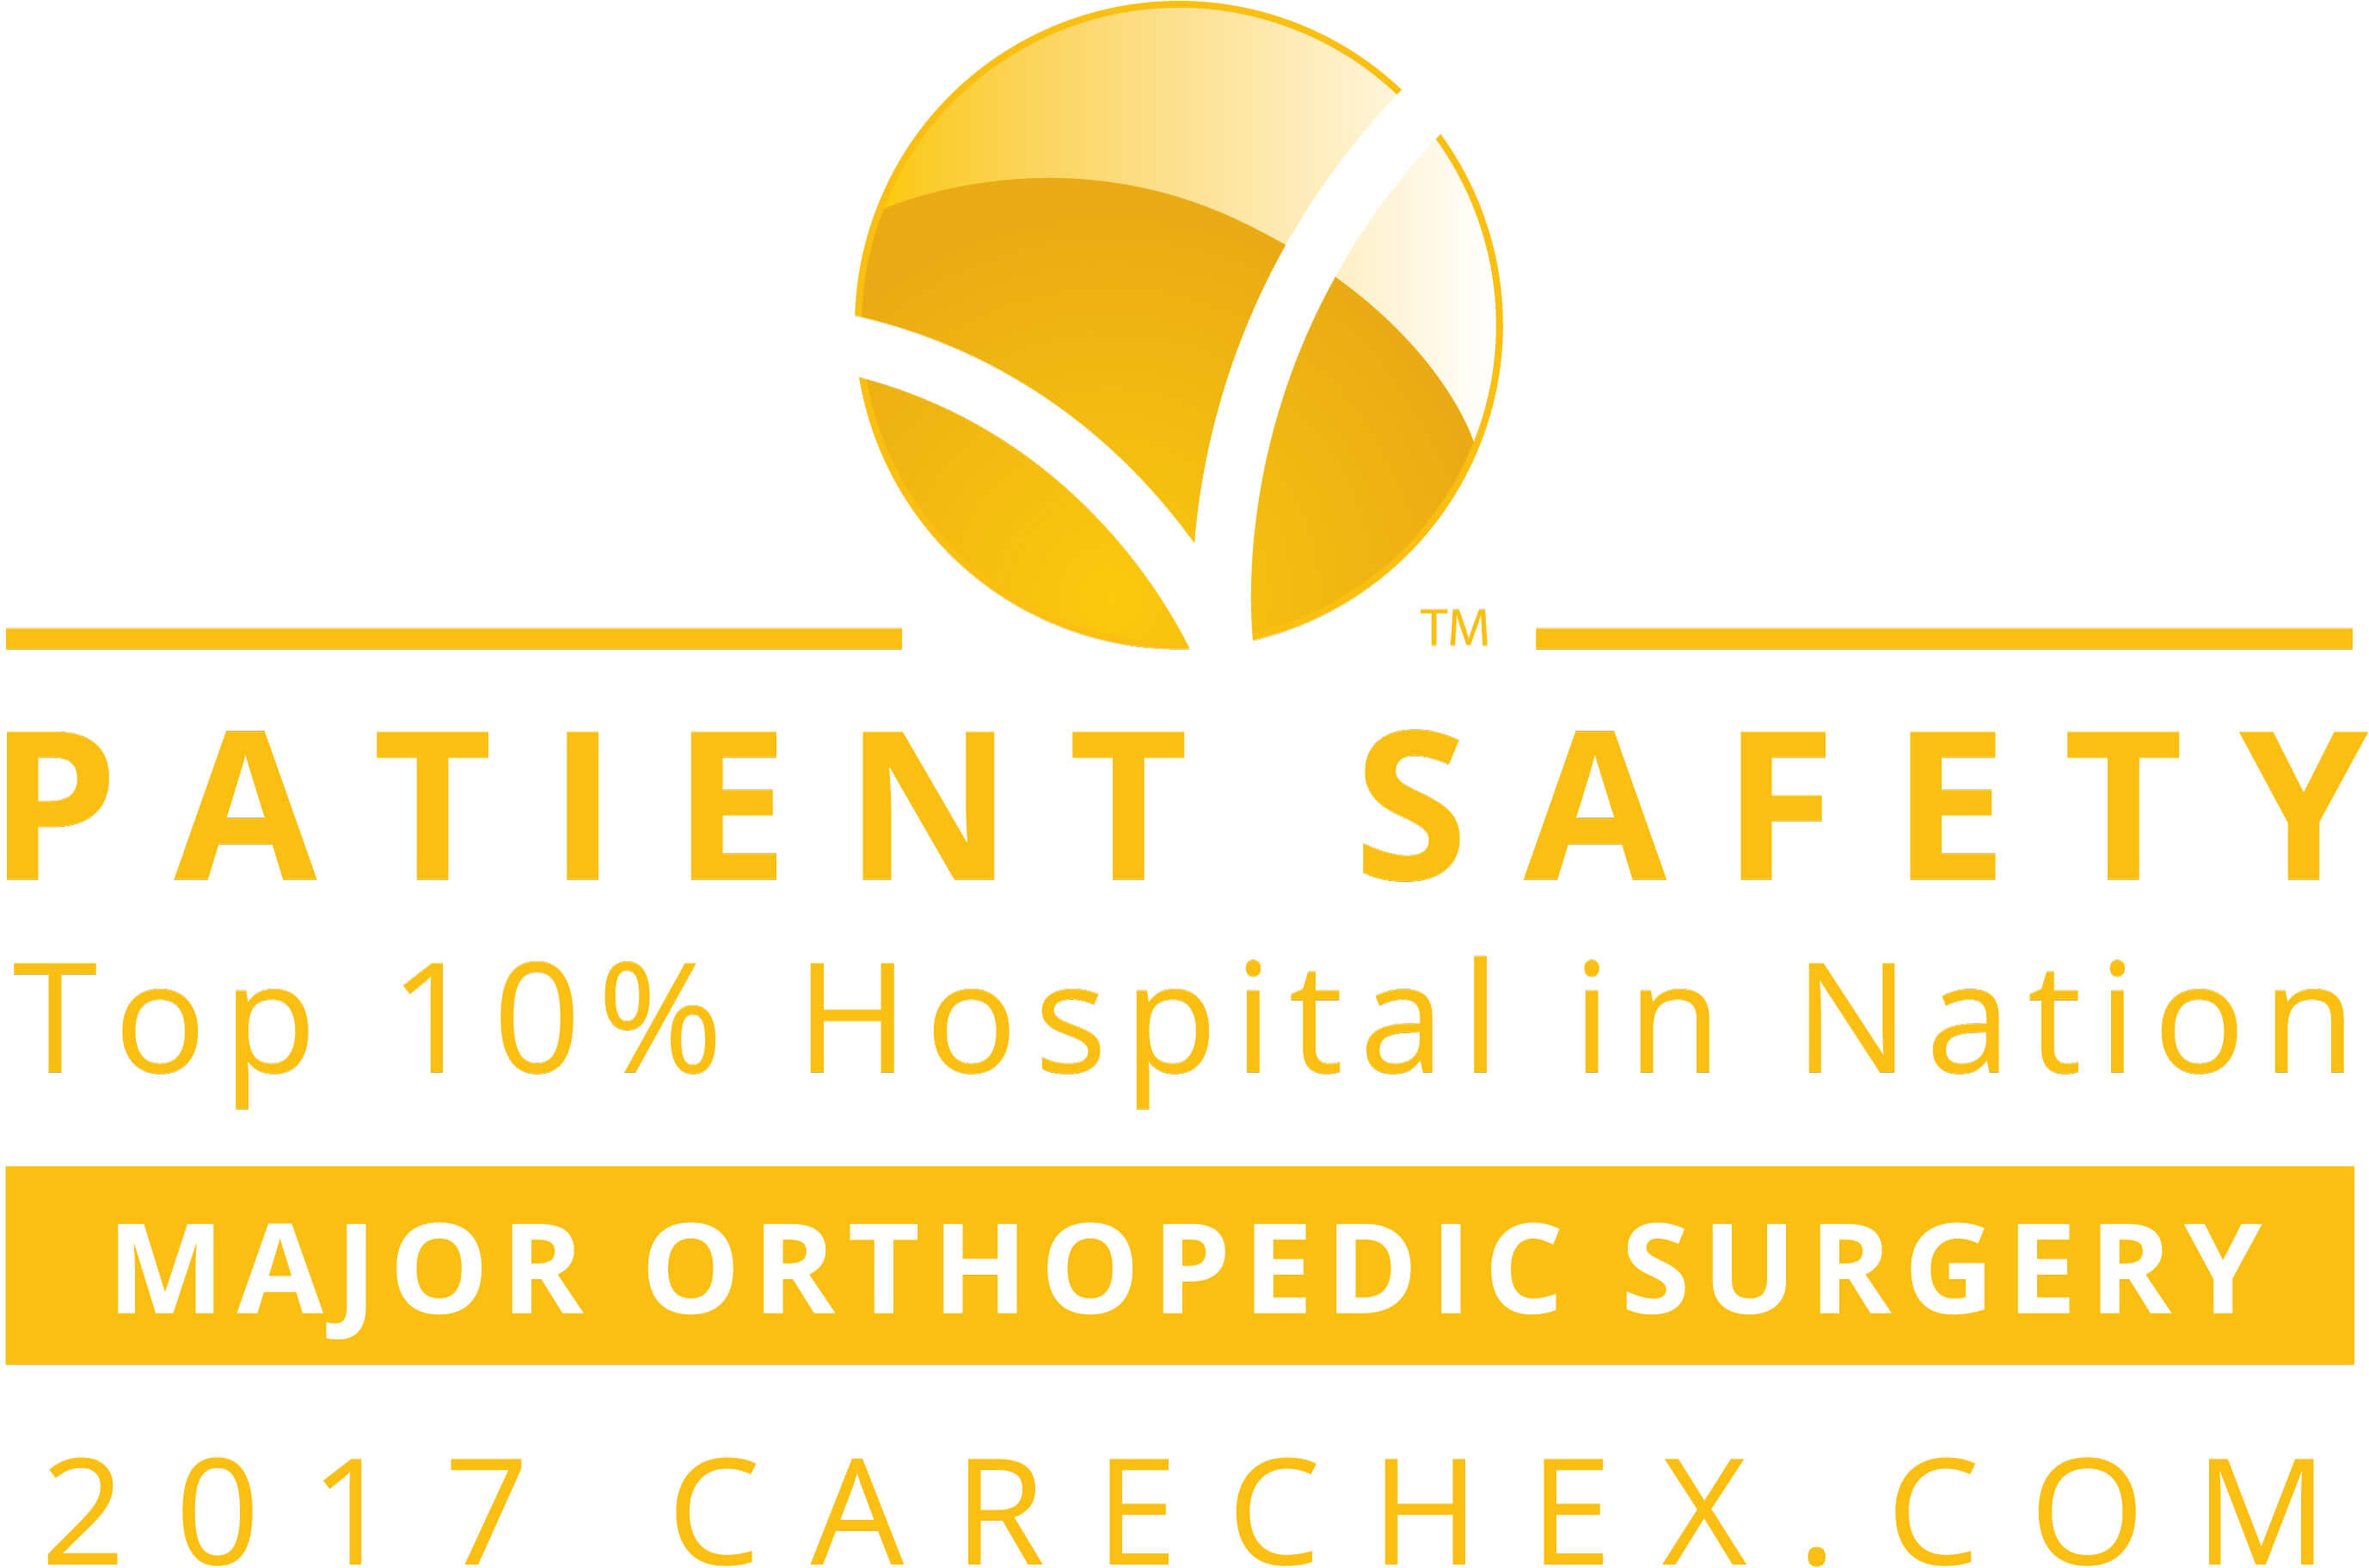 2017 CareCheck Top 10% Hospitals in Nation for Patient Safety - Major Orthopedic Surgery.